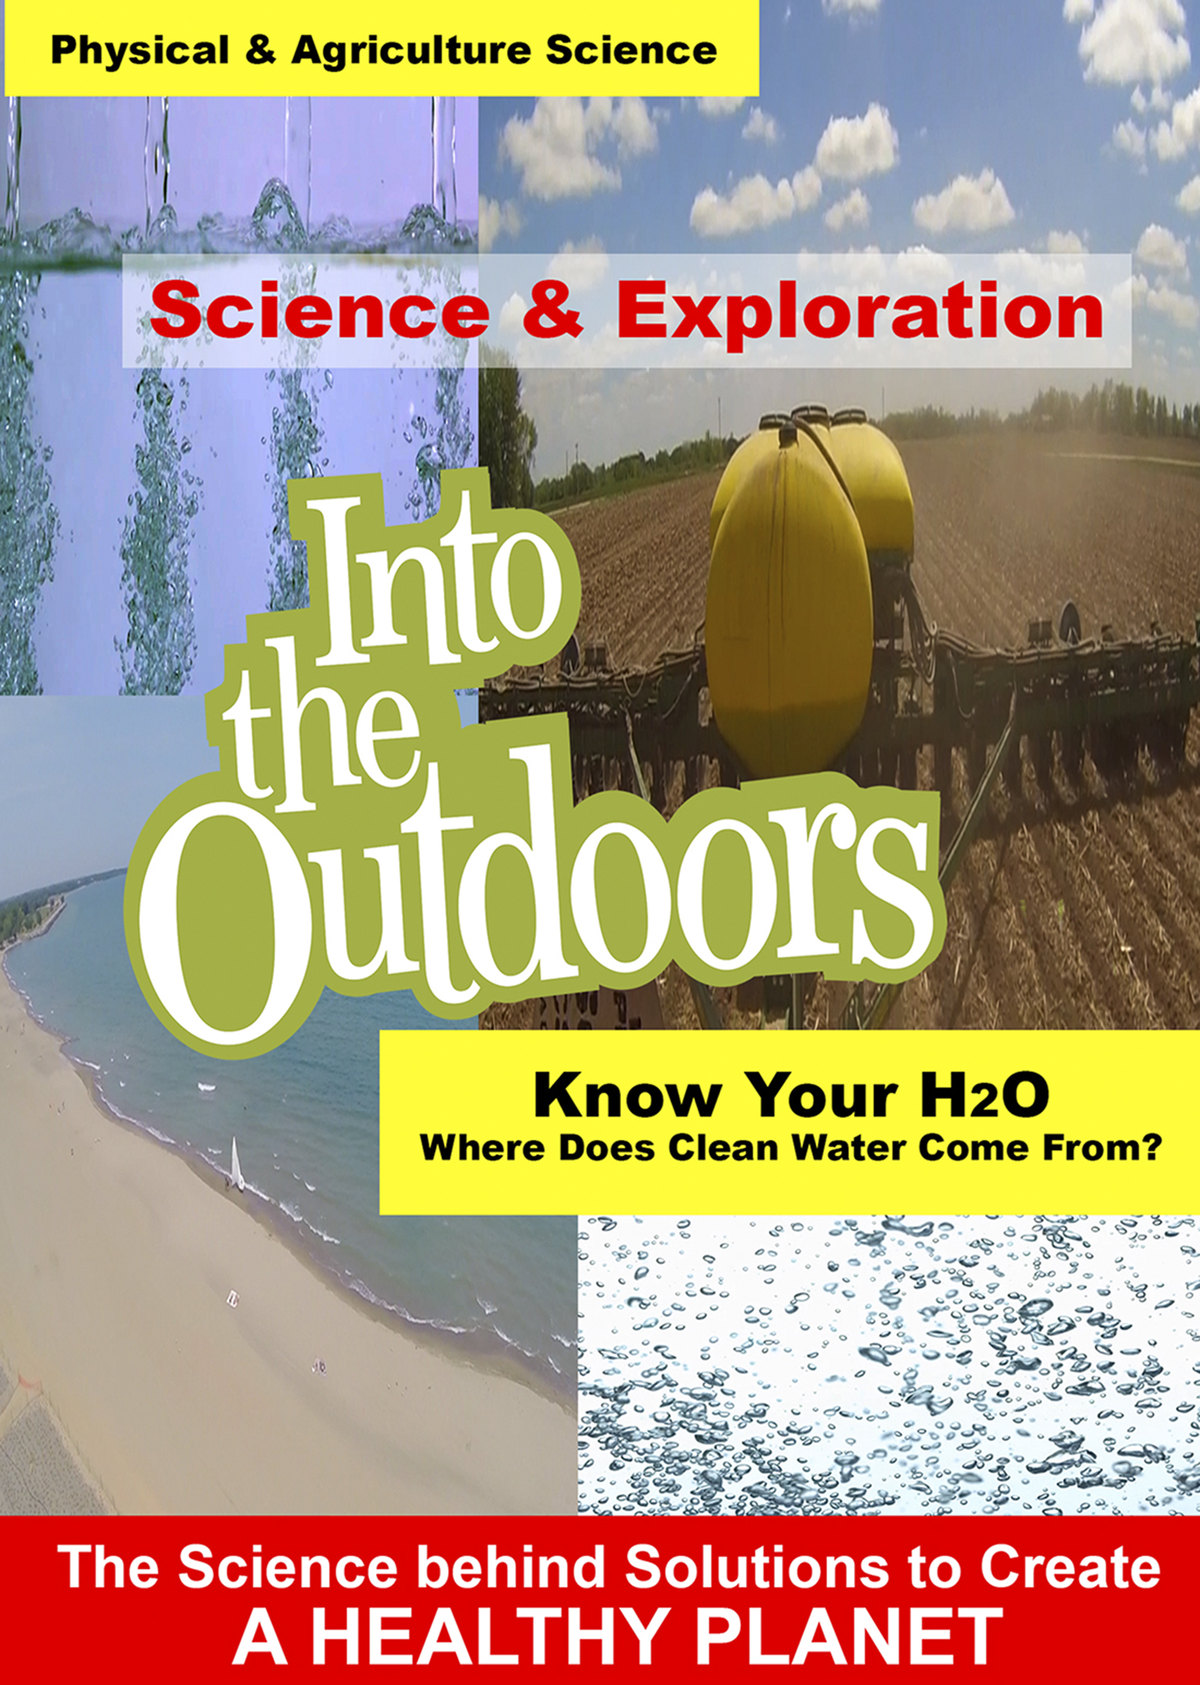 K4971 - Know Your H2O - Where Does Clean Water Come From?